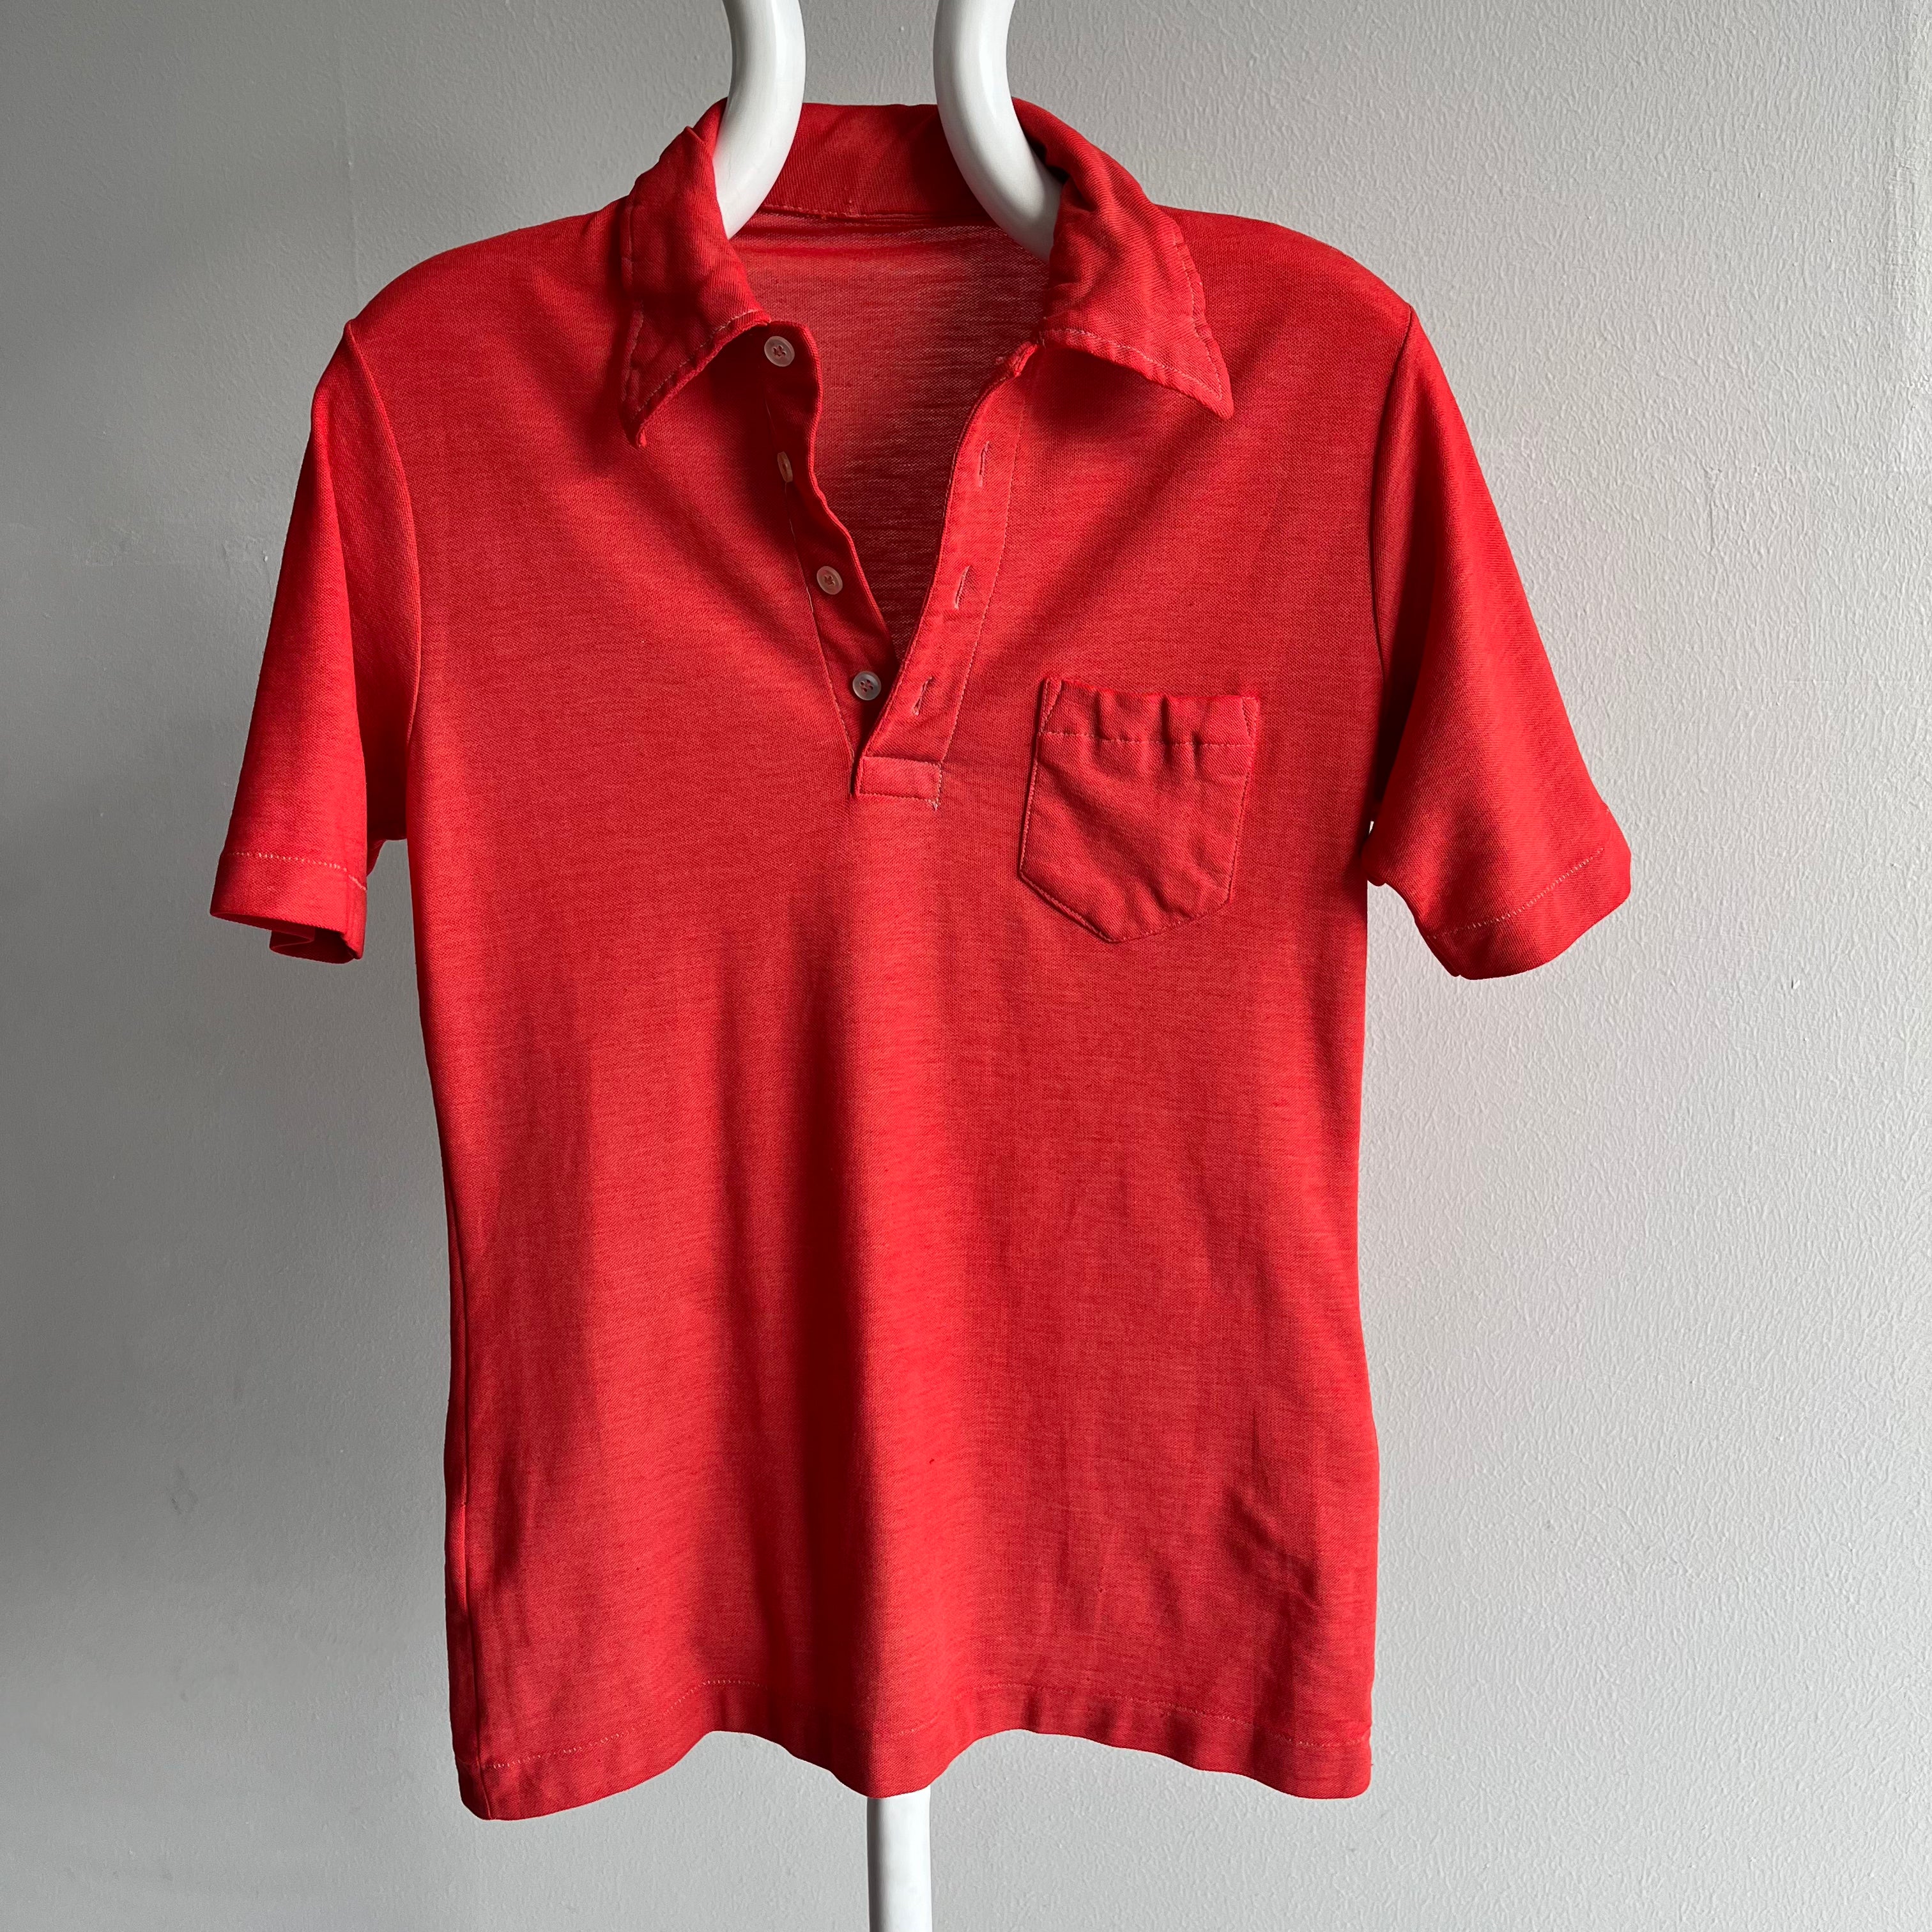 1970s Super Faded Smaller Red Pocket Polo T-Shirt